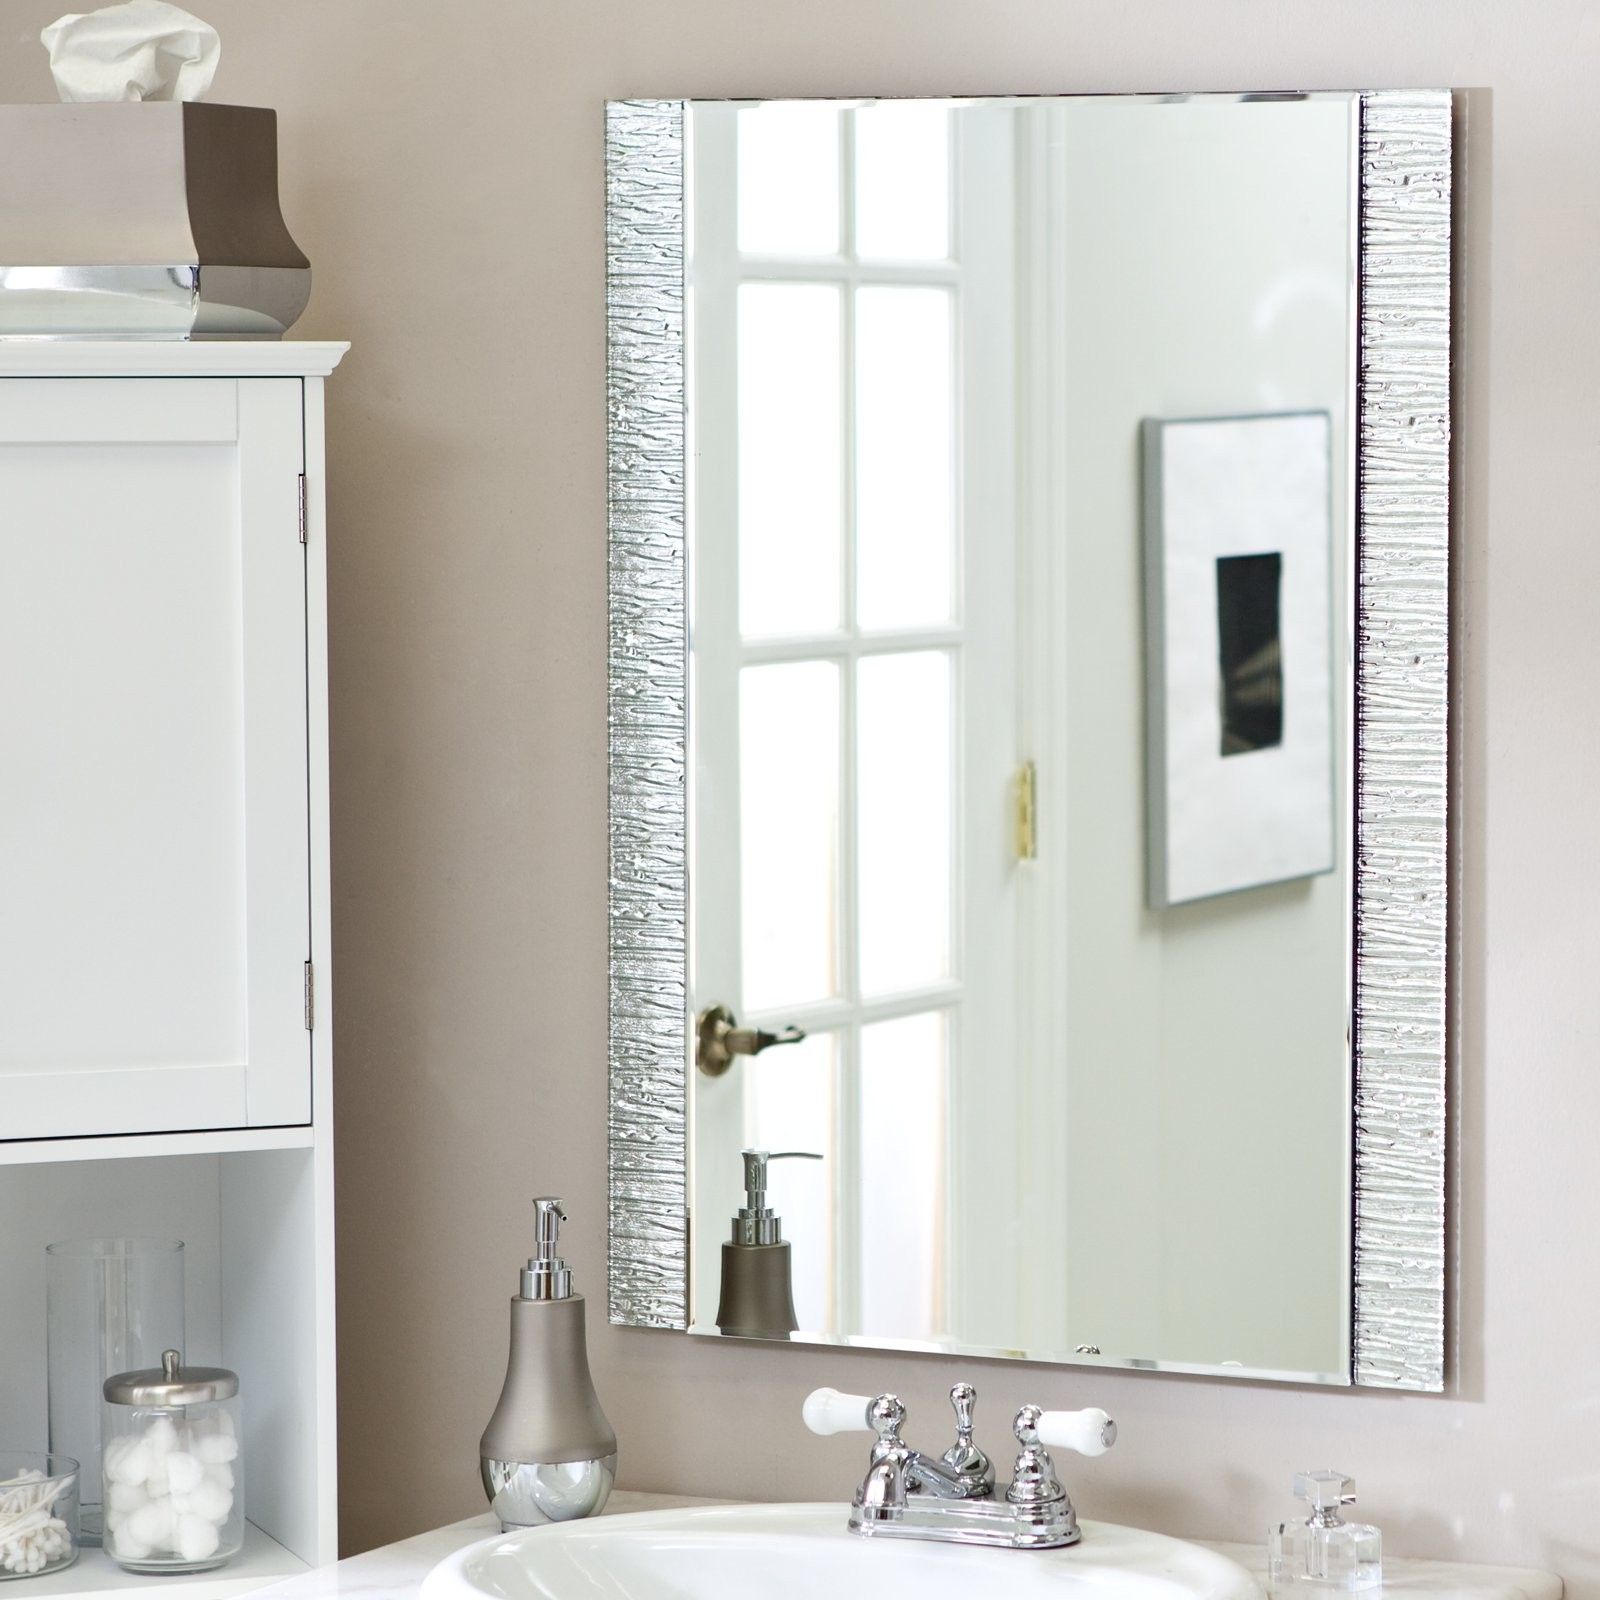 Awesome Bathroom Frameless Mirror Concept – Home Sweet Home | Modern In Frameless Cut Corner Vanity Mirrors (View 14 of 15)